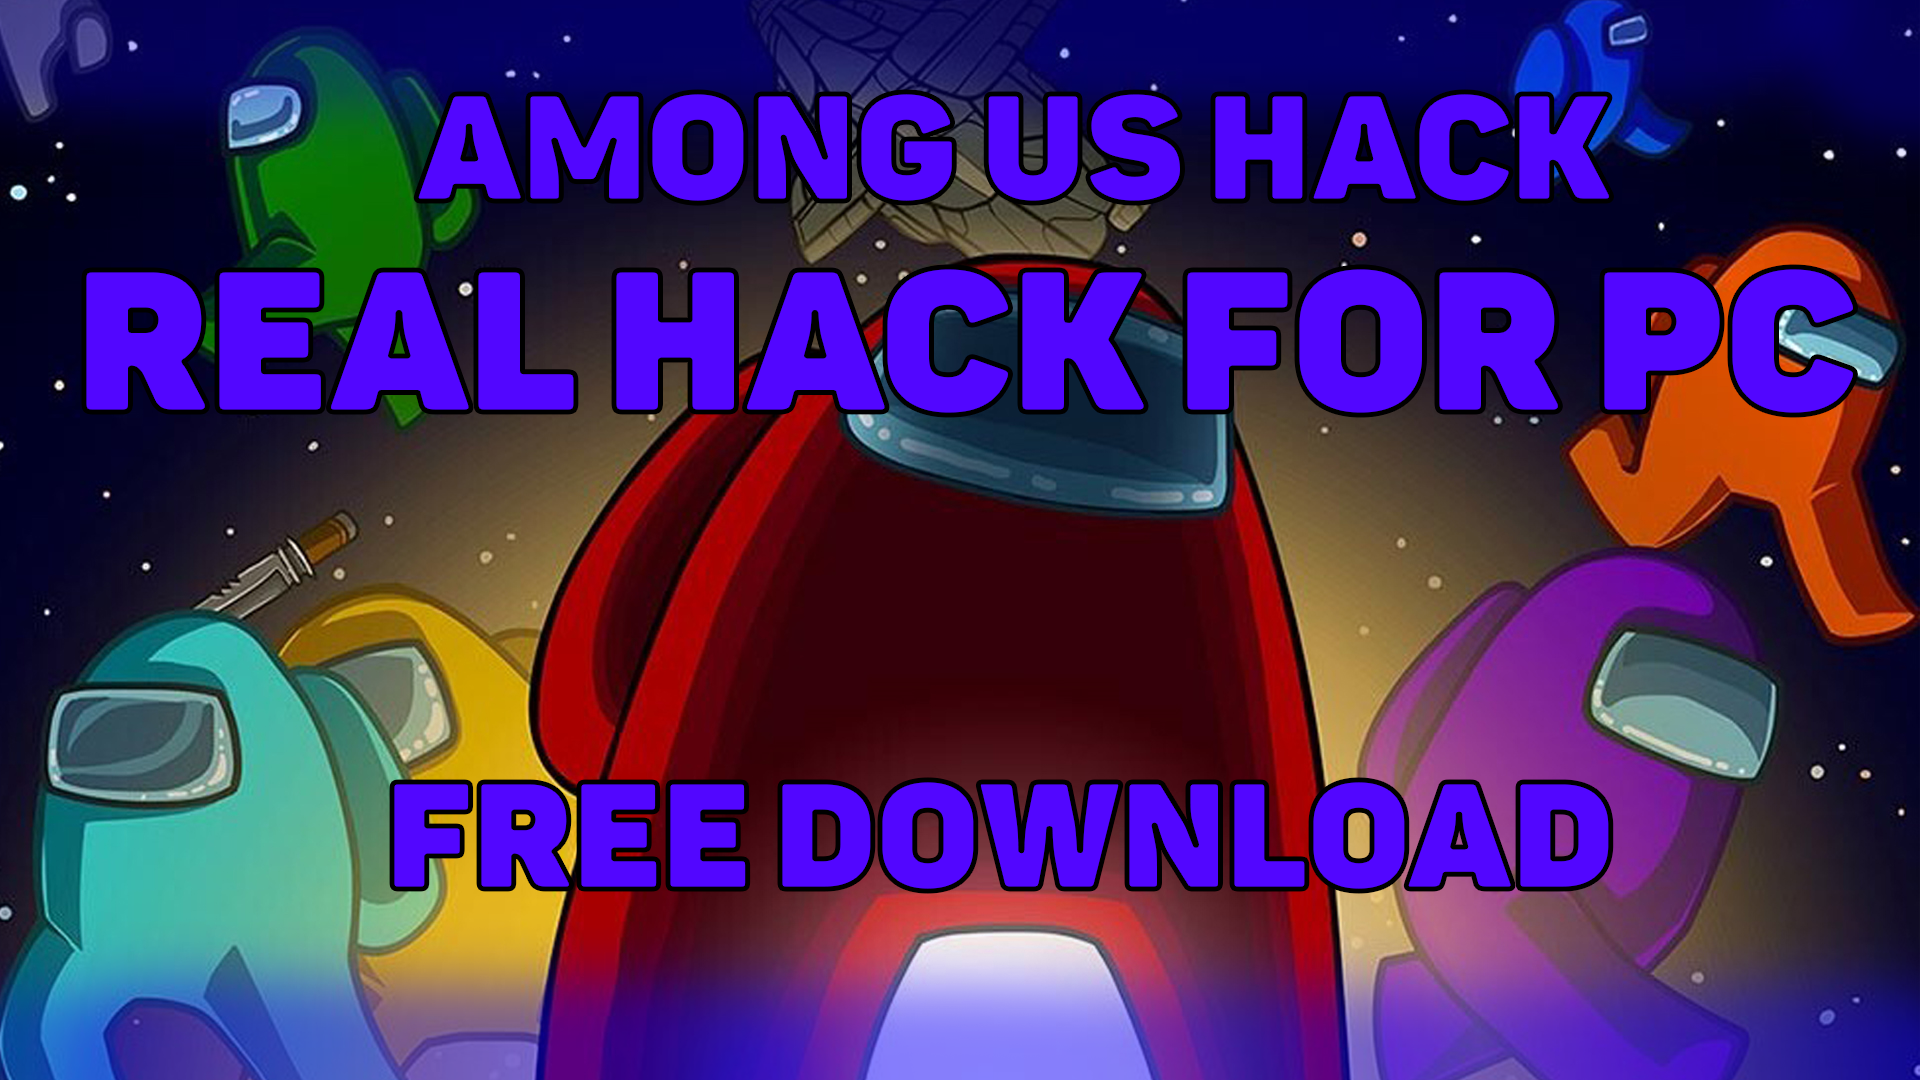 Among us hack for pc free download — Teletype